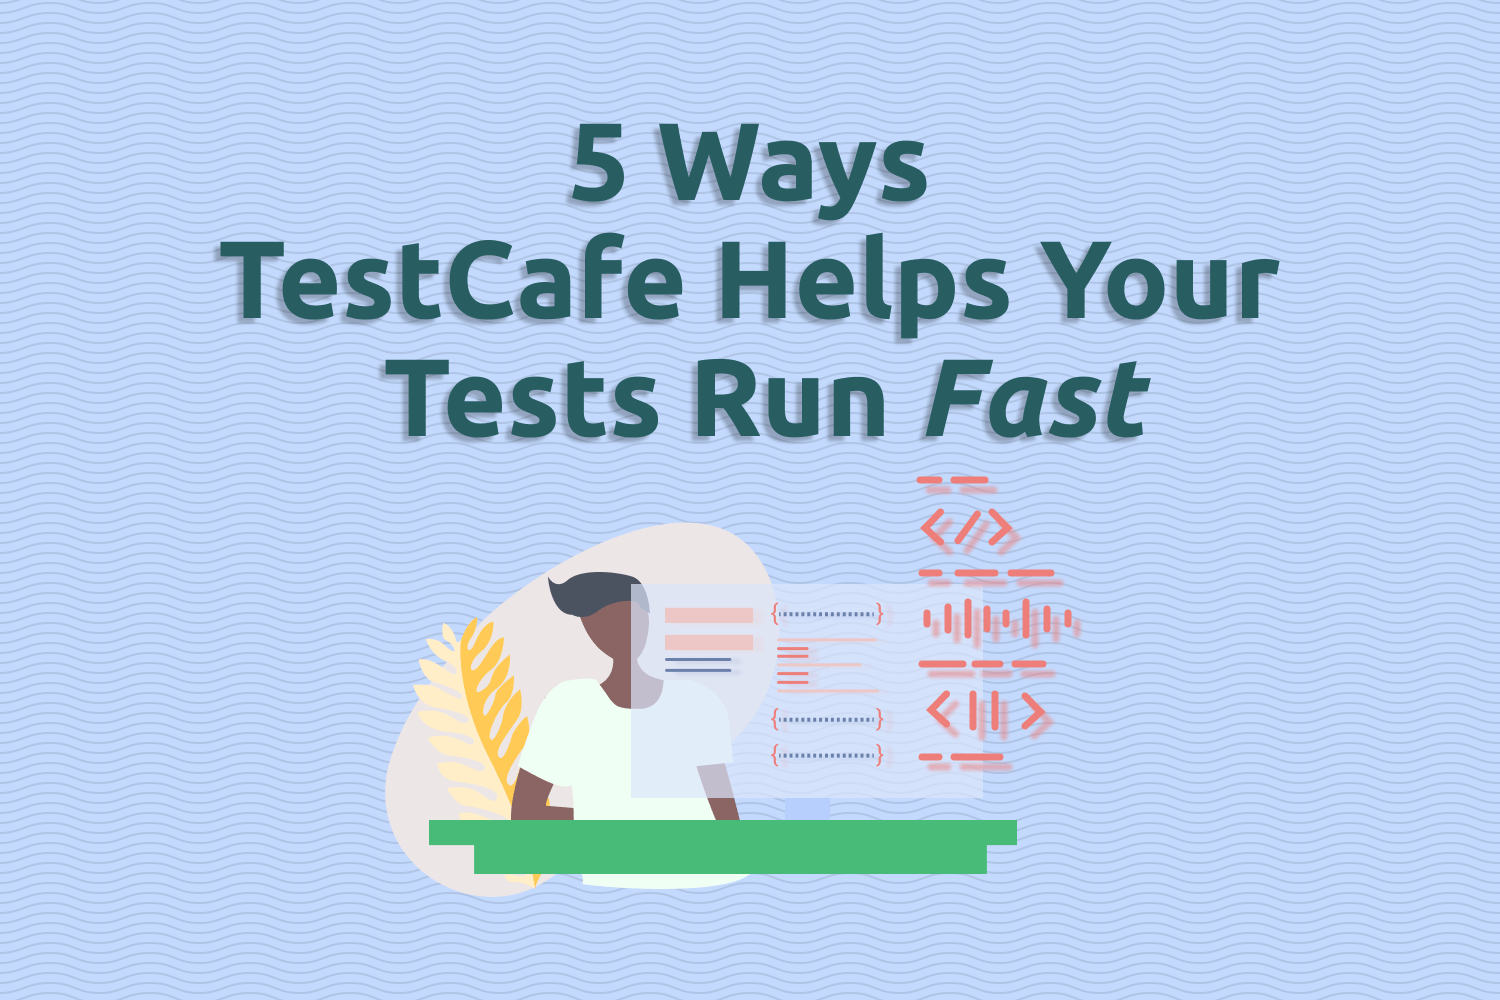 5 Ways TestCafe Helps Your Tests Run Fast